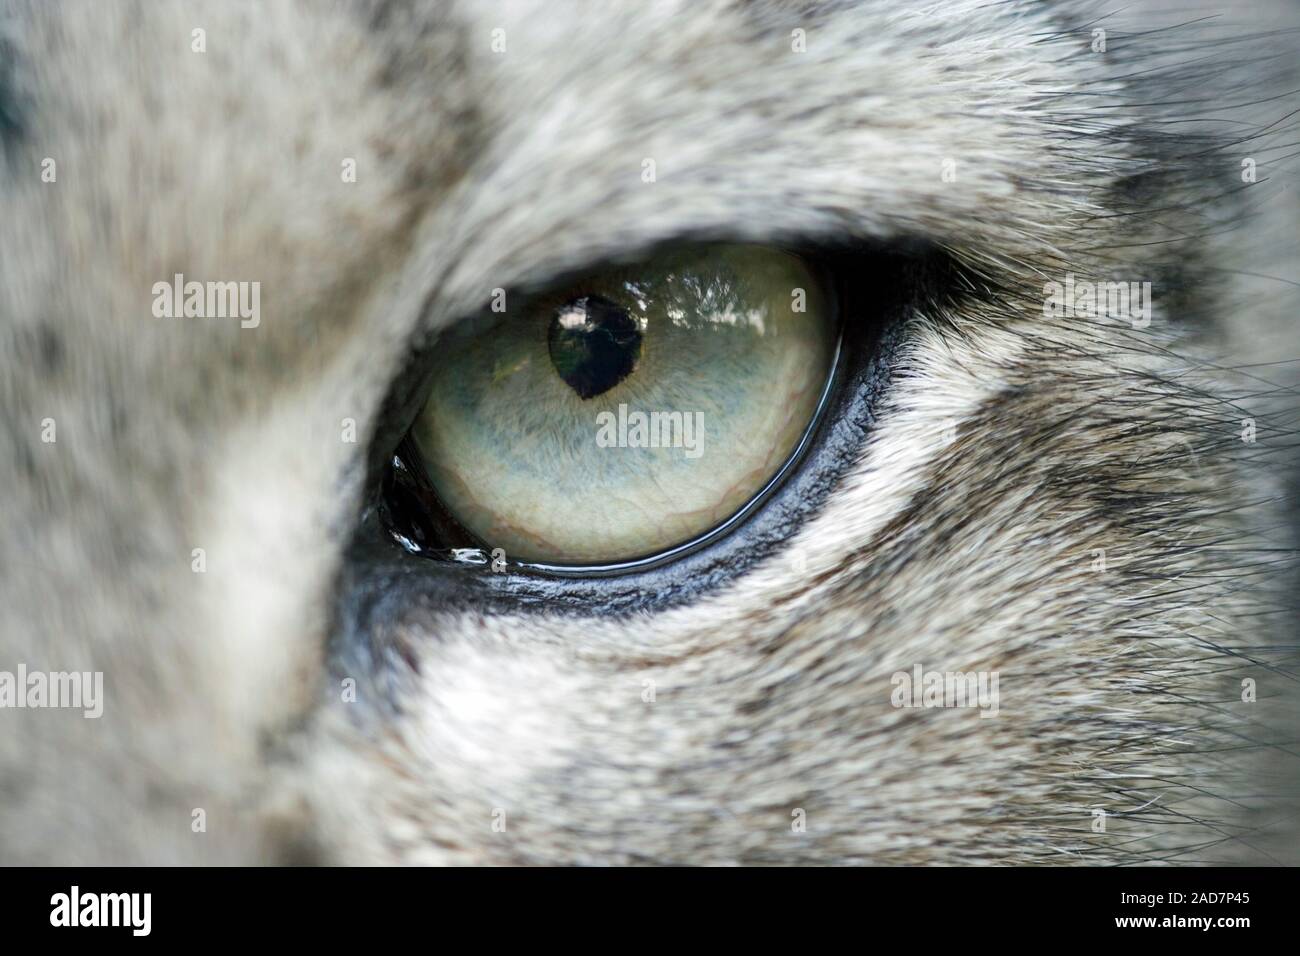 SNOW LEOPARD (Uncia uncia).  Close up of a left hand side eye. Stock Photo